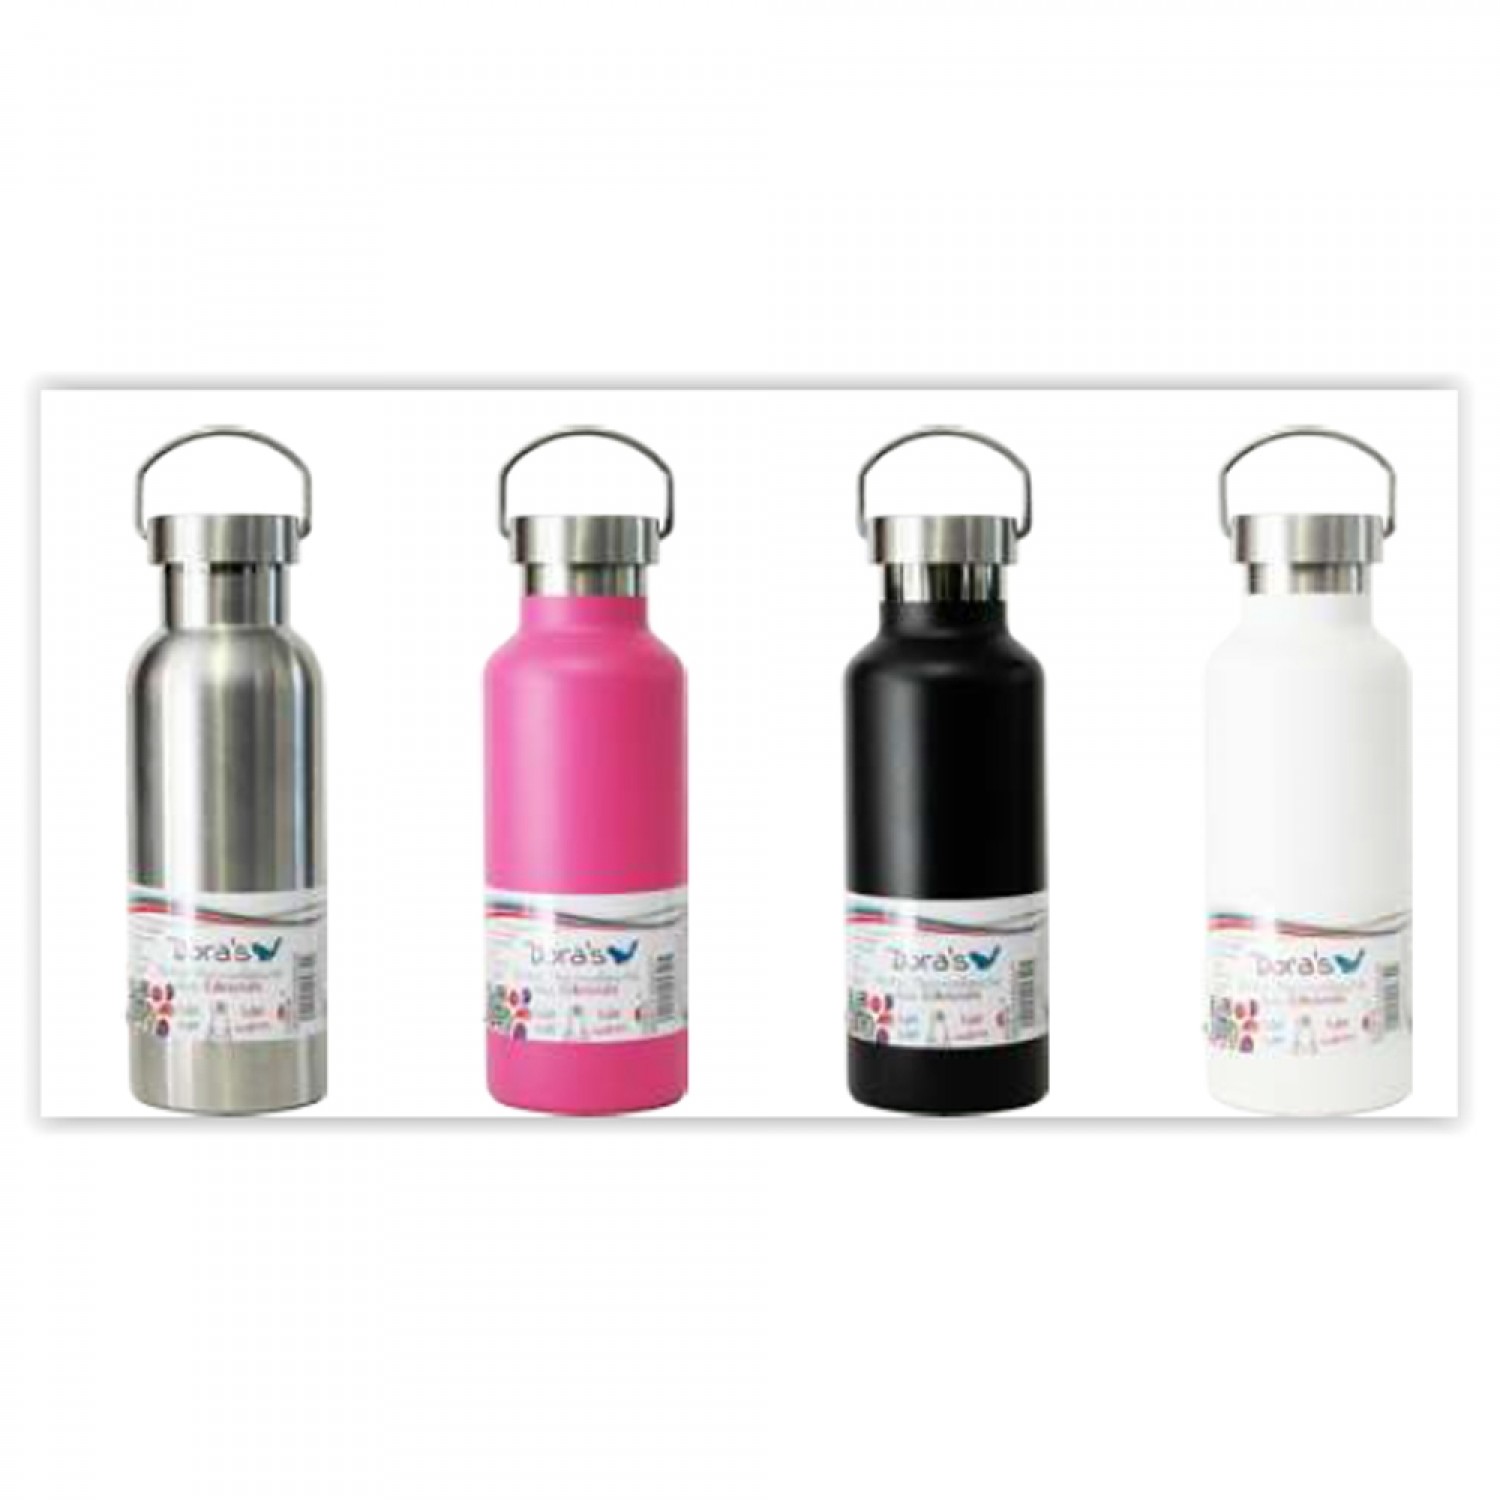 Dora - Retro thermo water bottle stainless steel